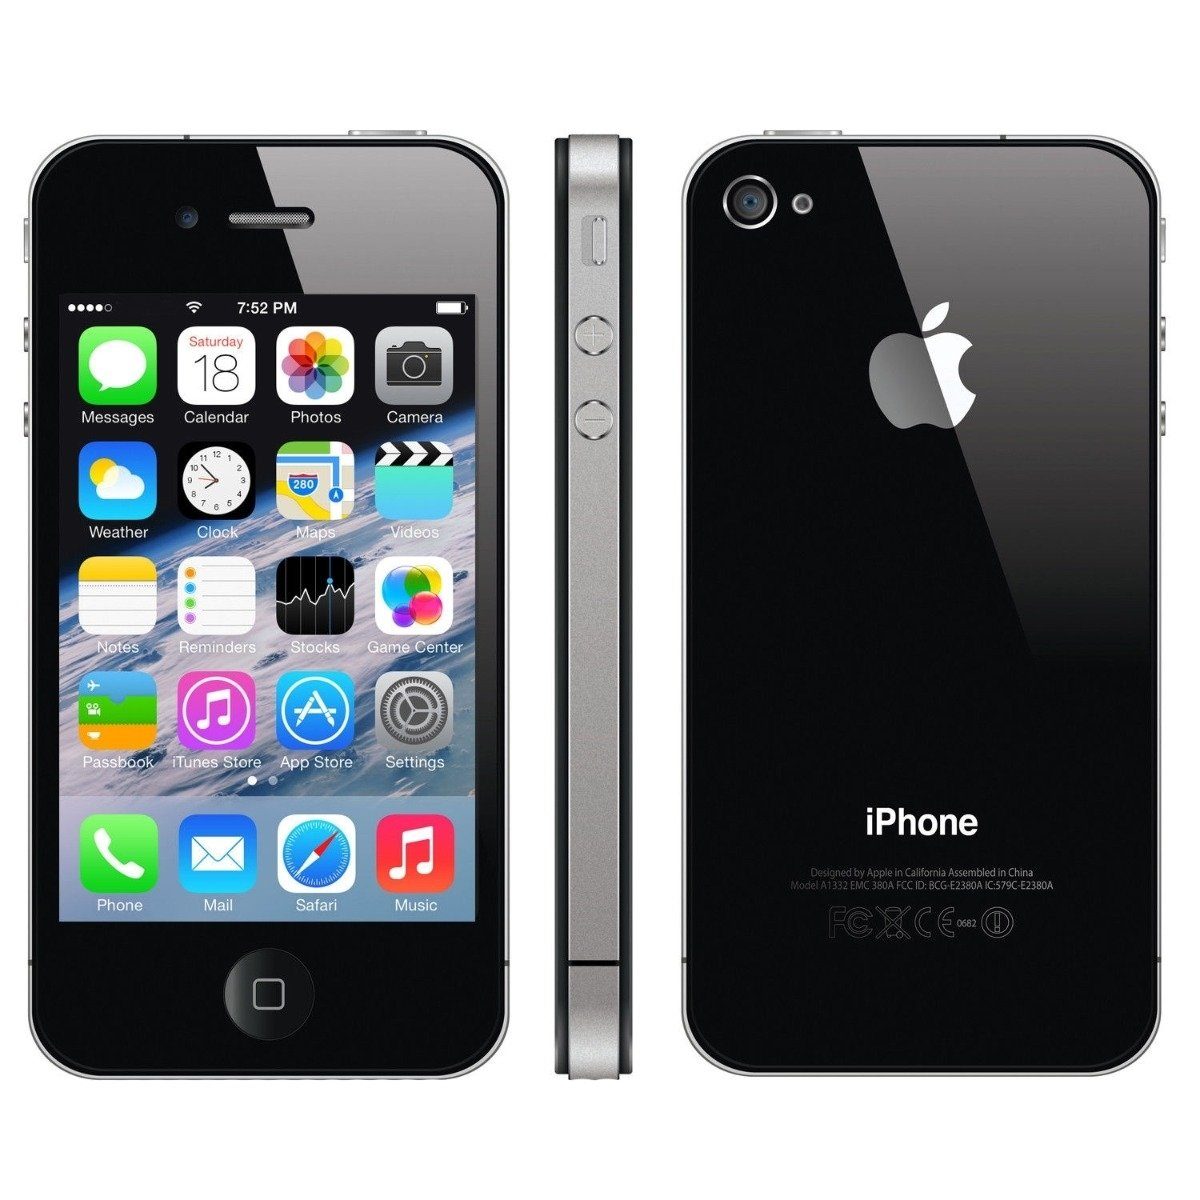 Apple iPhone 4S Factory Unlocked - Assorted Colors and Sizes / Black / 32GB